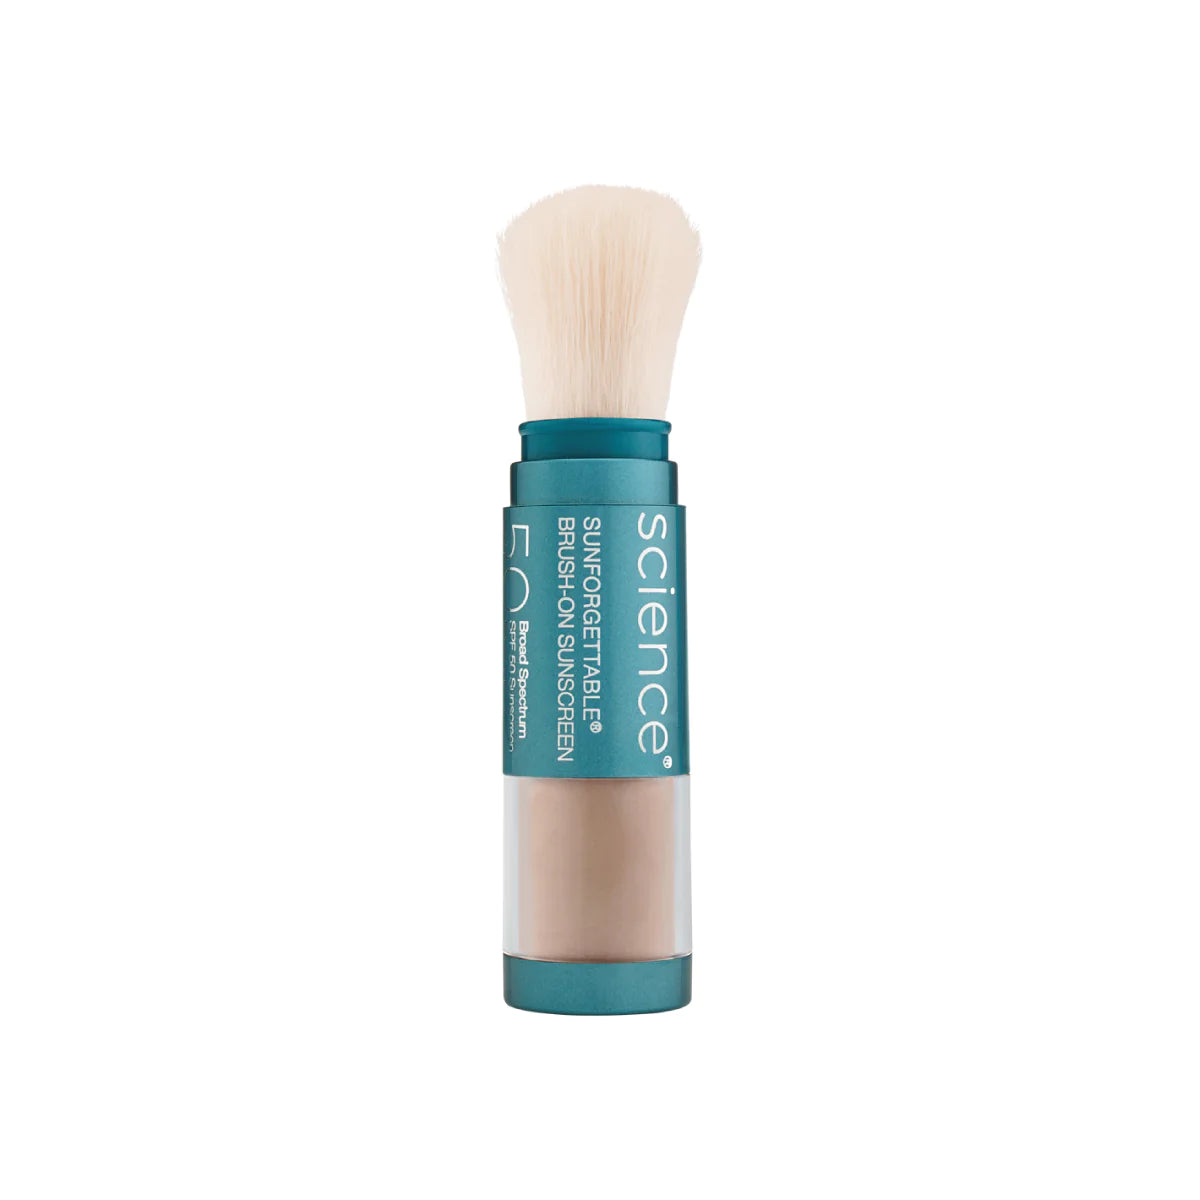 COLORSCIENCE SUNFORGETTABLE TOTAL PROTECTION BRUSH-ON SHIELD SPF 50 (MEDIUM) 6G